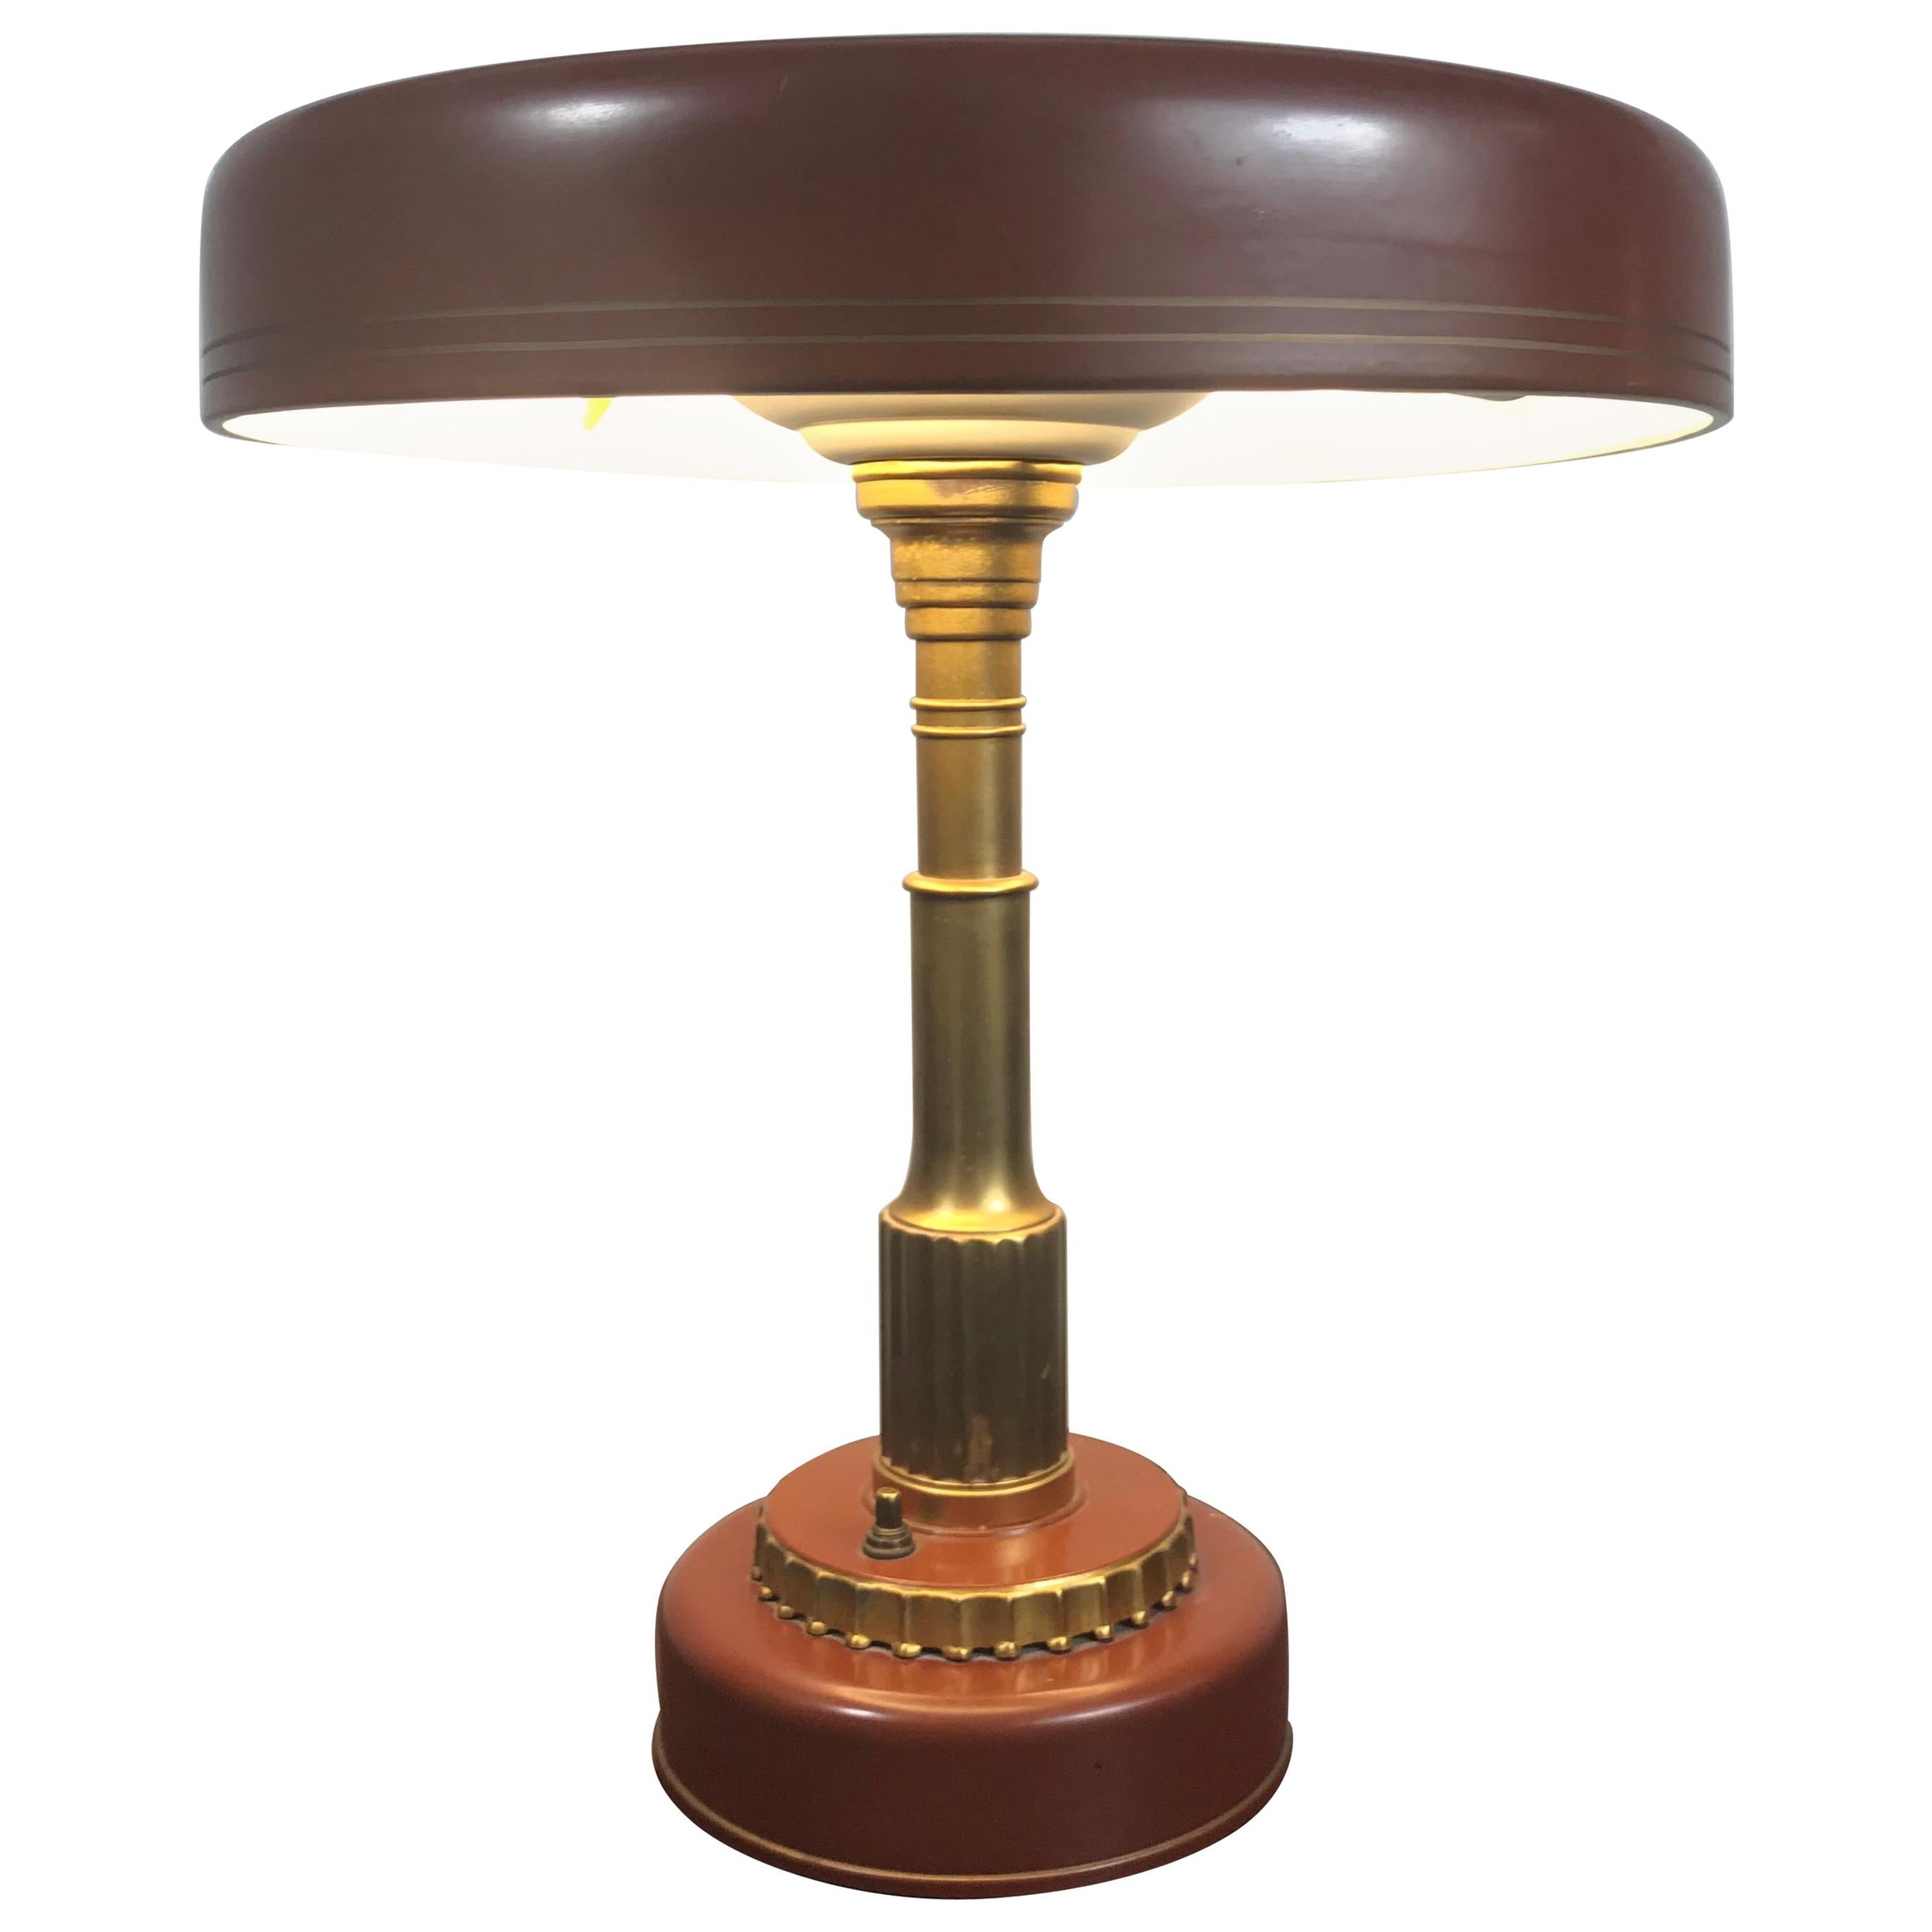 Art Deco Machine Age Table or Desk Lamp Attributed to Gilbert Rohde